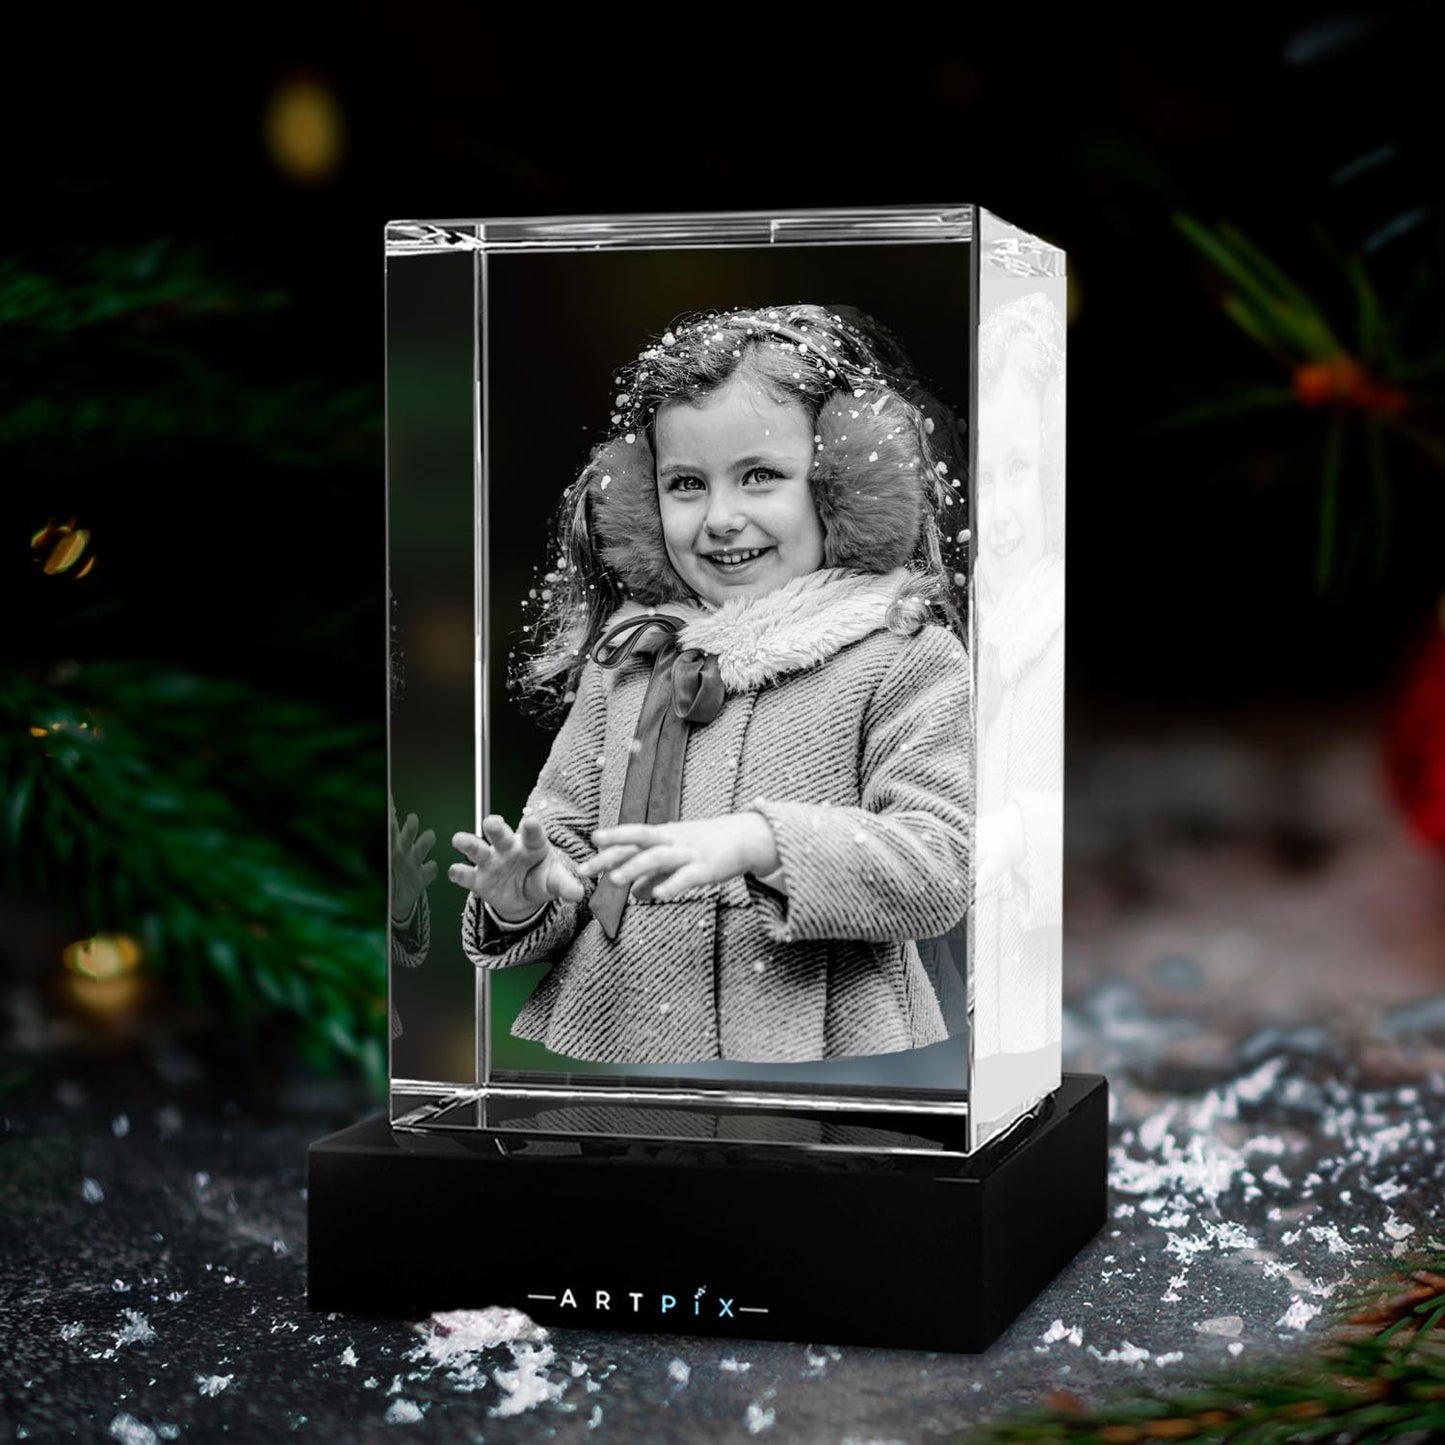 3D Crystal Photo (Great Personalized Customized Gift With Your Own Photo)